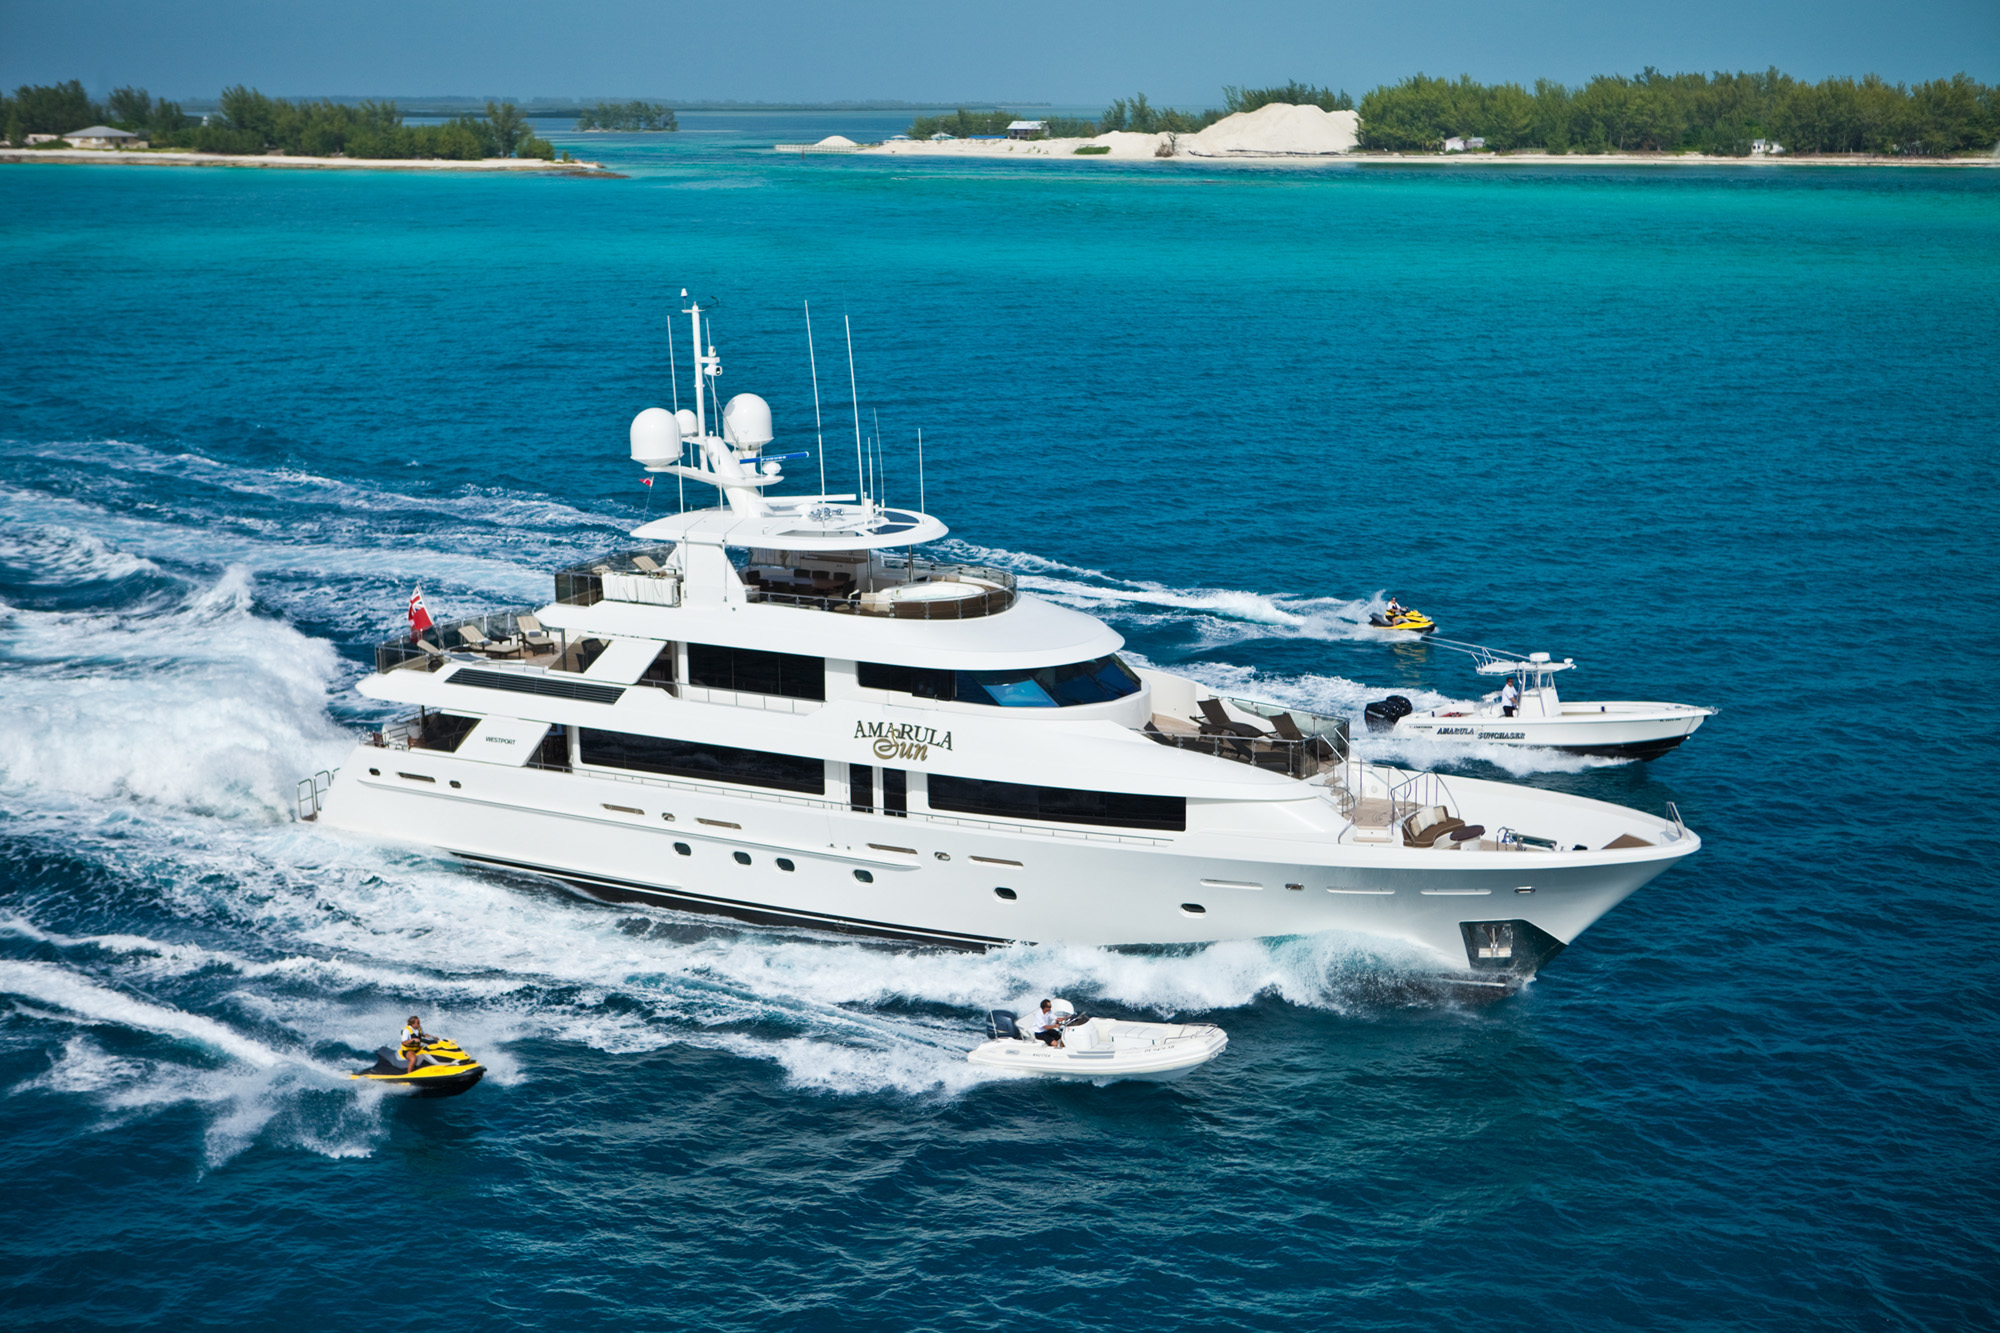 Bahamas Yacht Charters & Luxury Yacht Rental The Complete 2018 & 2019